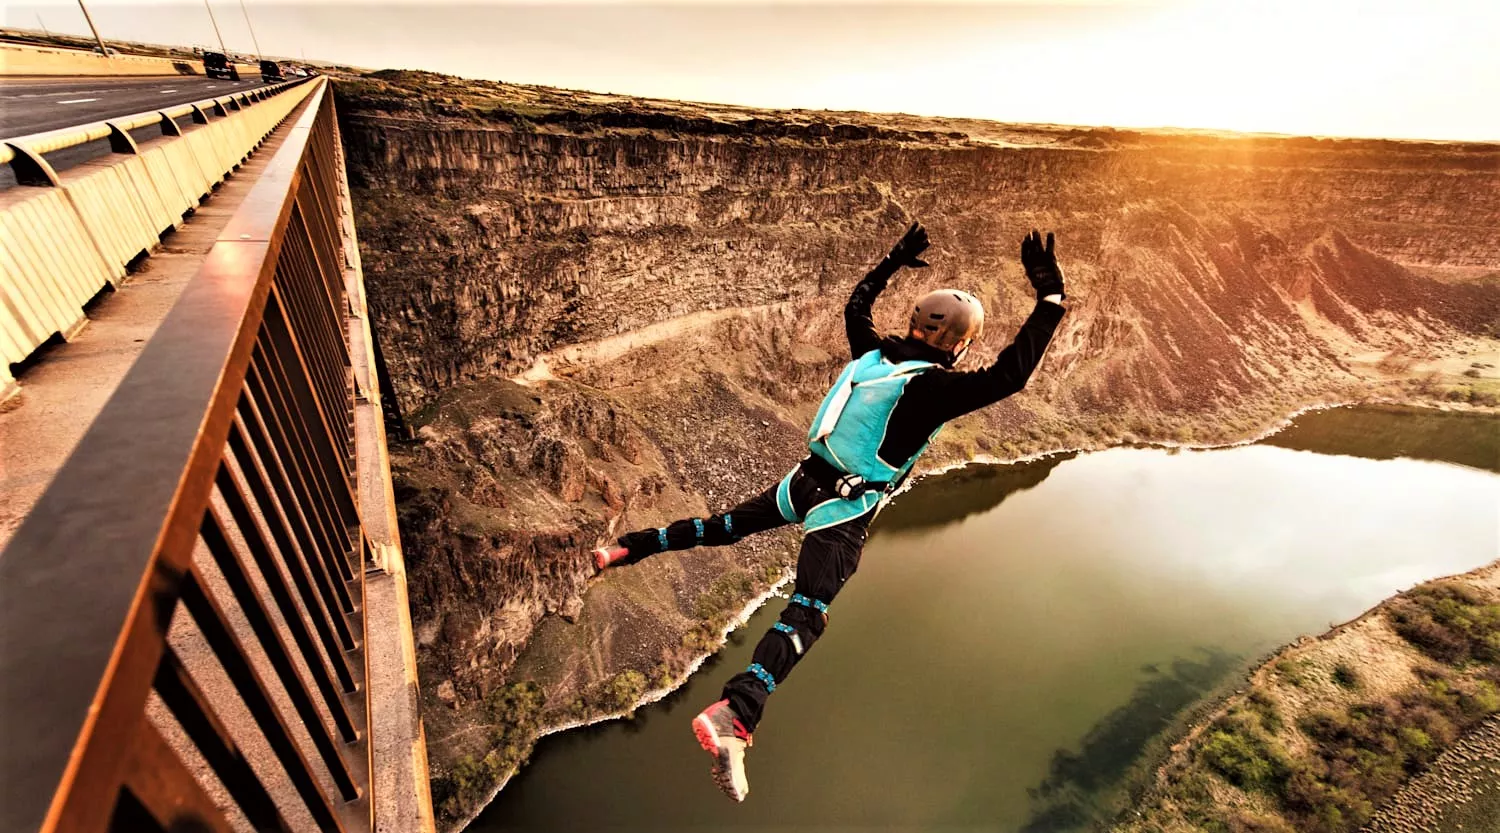 Snake River BASE Academy in USA, North America | BASE Jumping - Rated 0.9